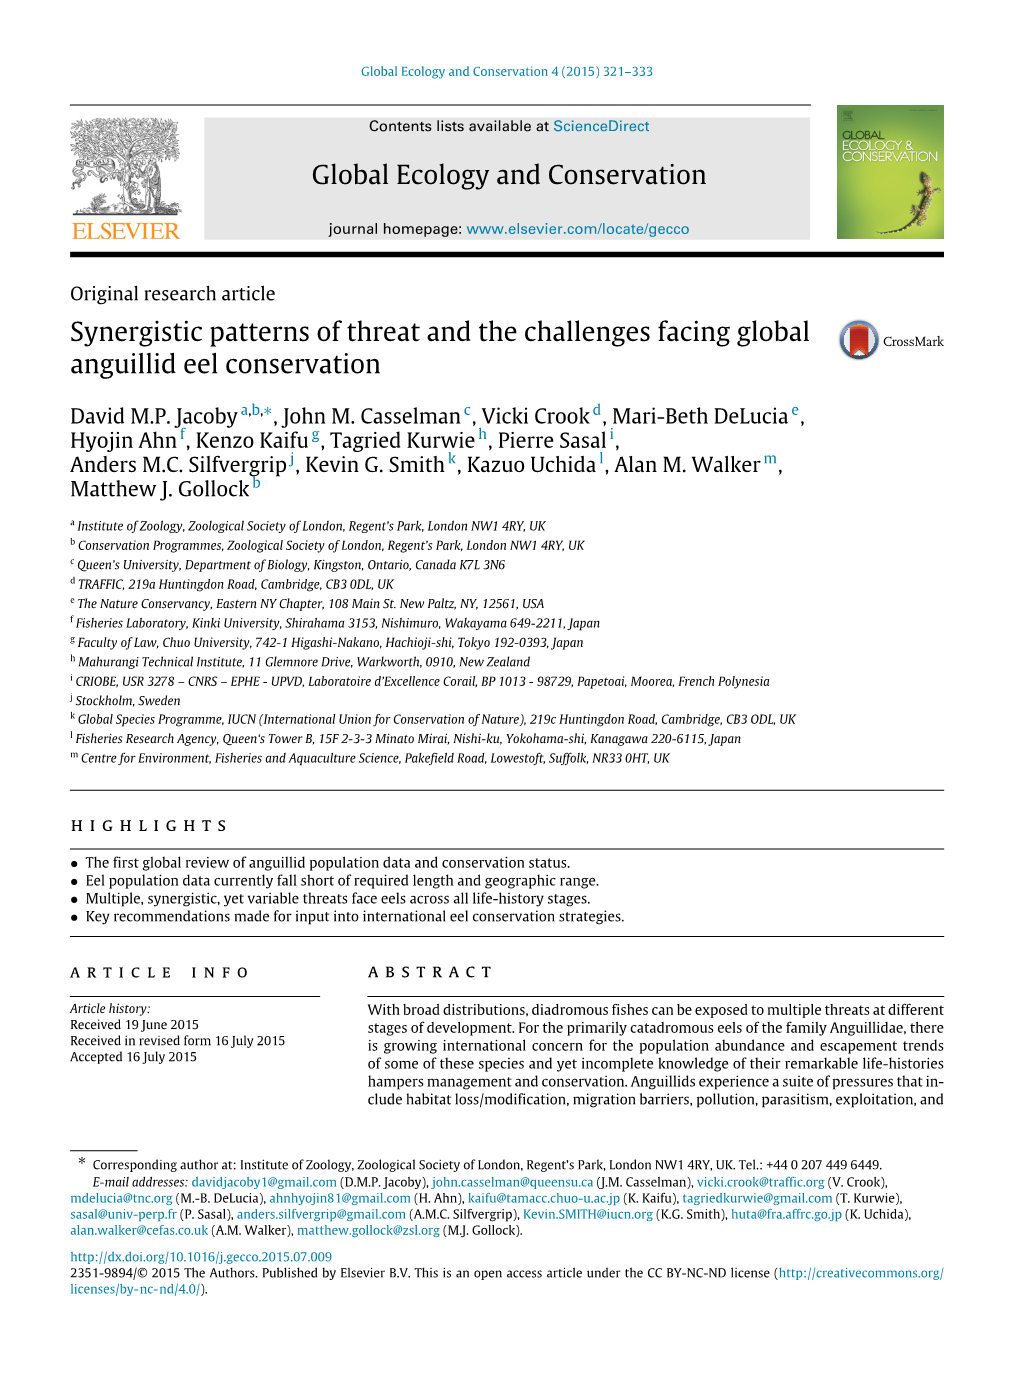 Synergistic Patterns of Threat and the Challenges Facing Global Anguillid Eel Conservation